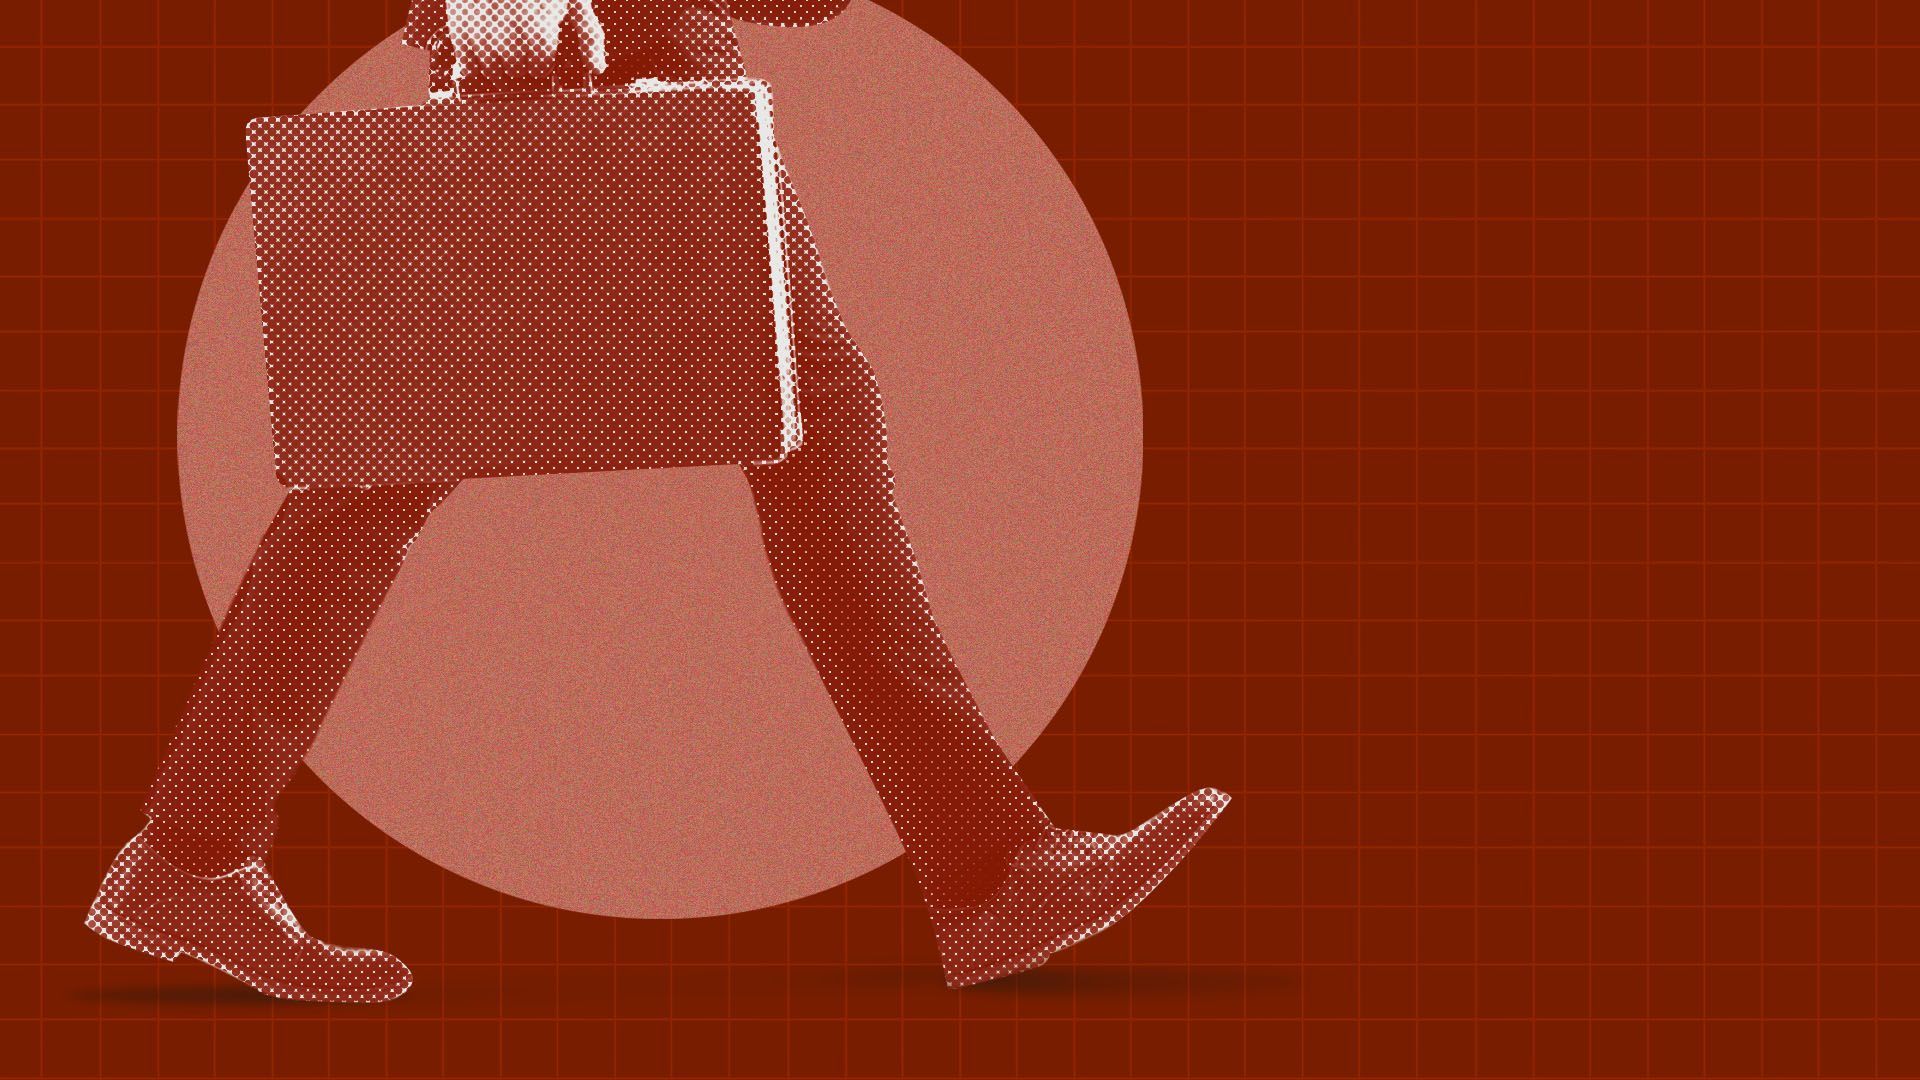 an illustration of a person with a briefcase walking in front of a burnt orange background with graph paper overlay